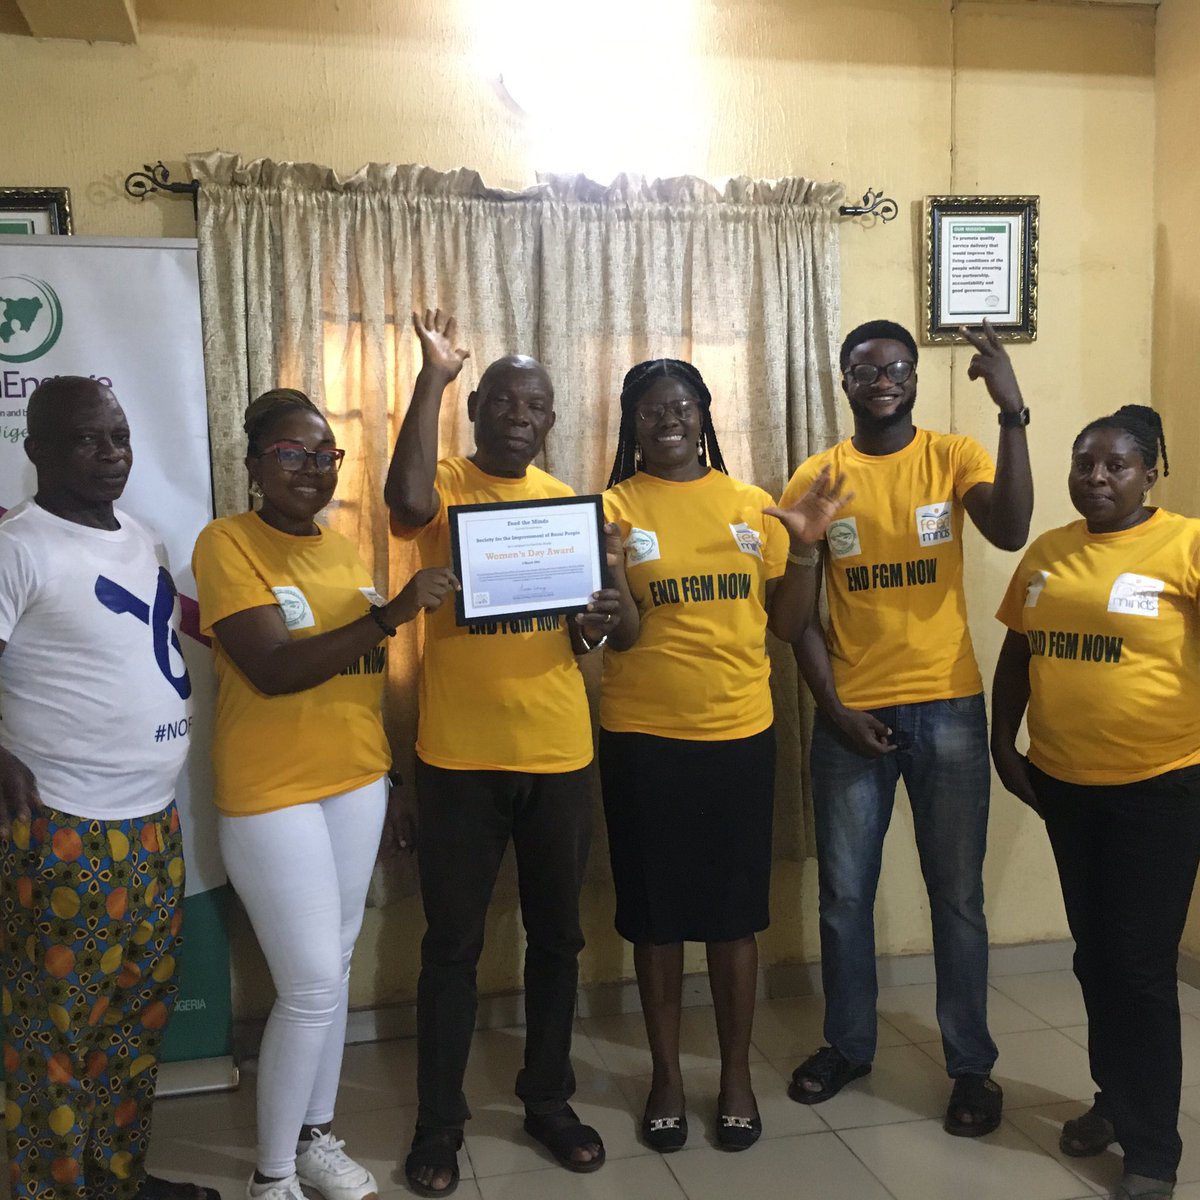 Last week, we were given an Award by @FeedtheMinds This Award was given to us in recognition of our giant strides towards promoting gender equality and women empowerment here in Nigeria. We can’t thank @FeedtheMinds enough for this Award.